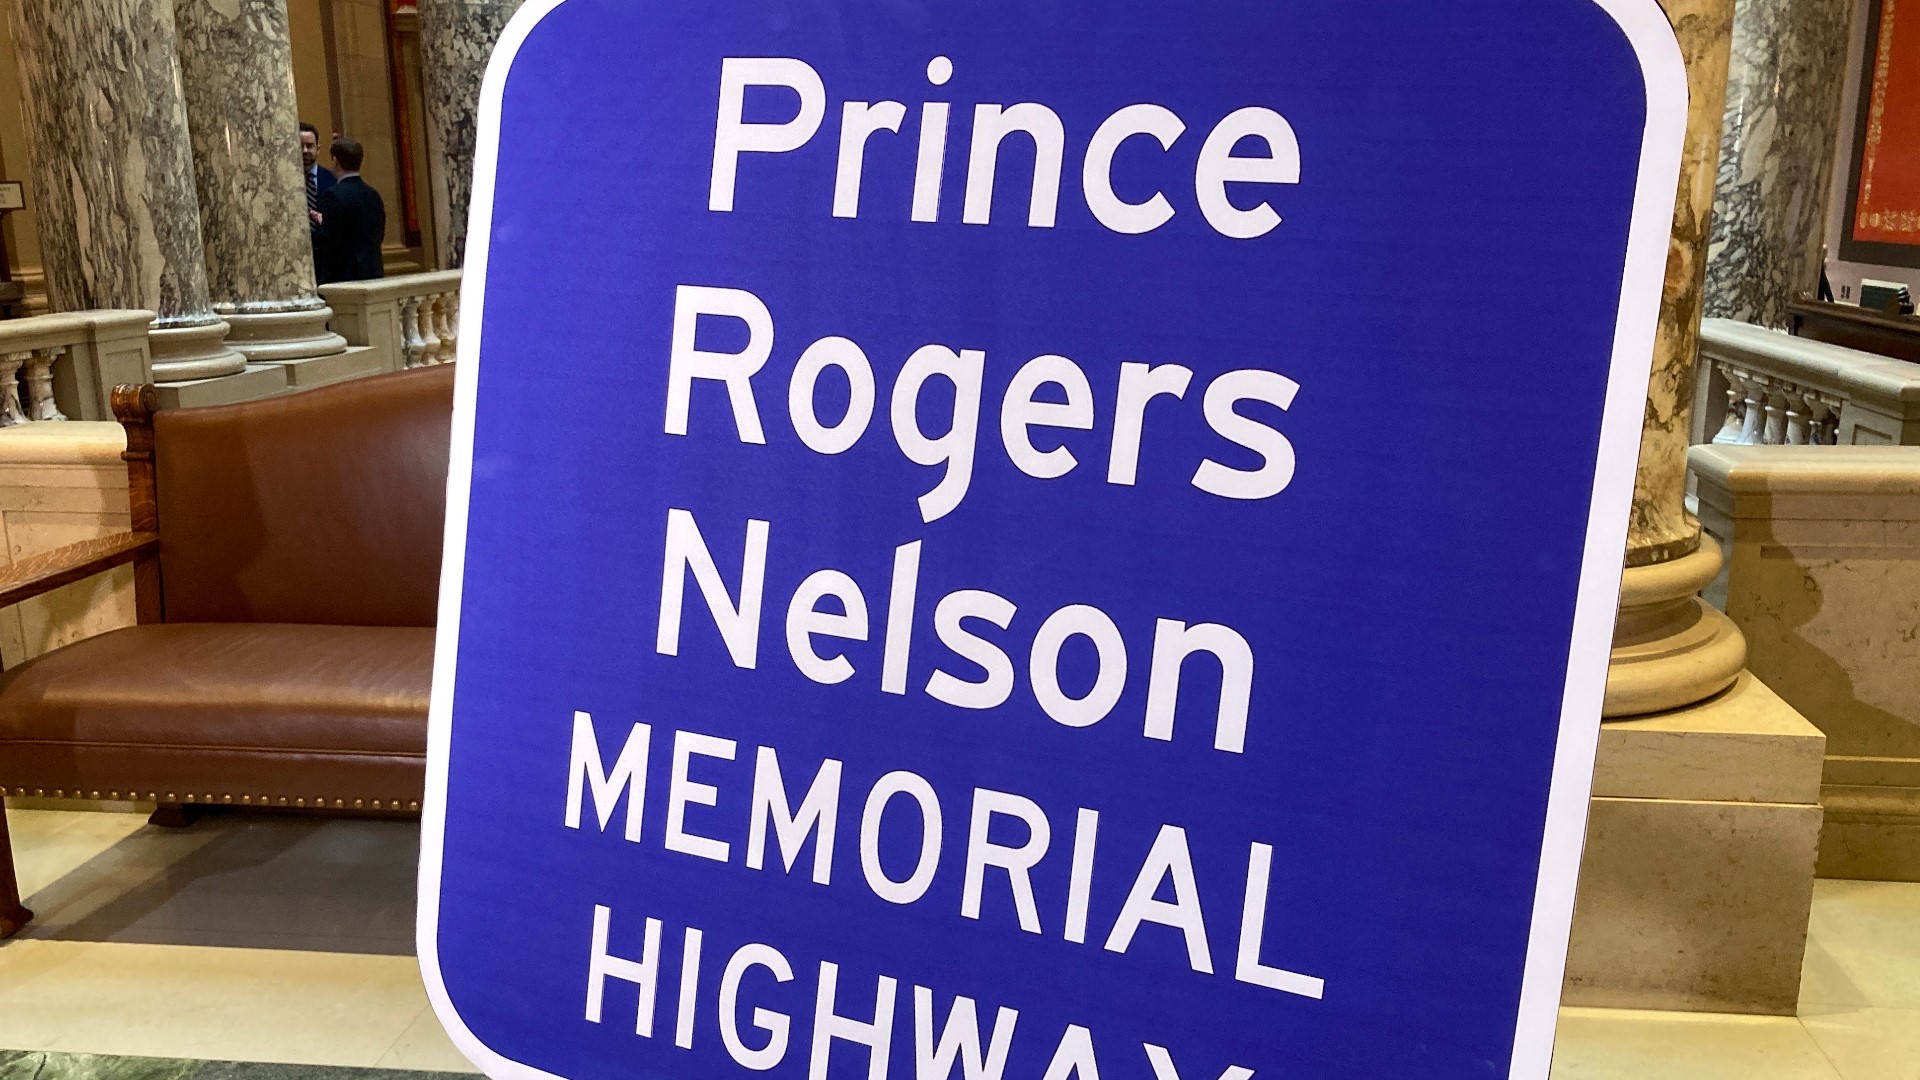 Purple signs for the "Prince Rogers Nelson Memorial Highway" will soon go up along a seven-mile stretch of Highway 5 in Chanhassen and Eden Prairie.